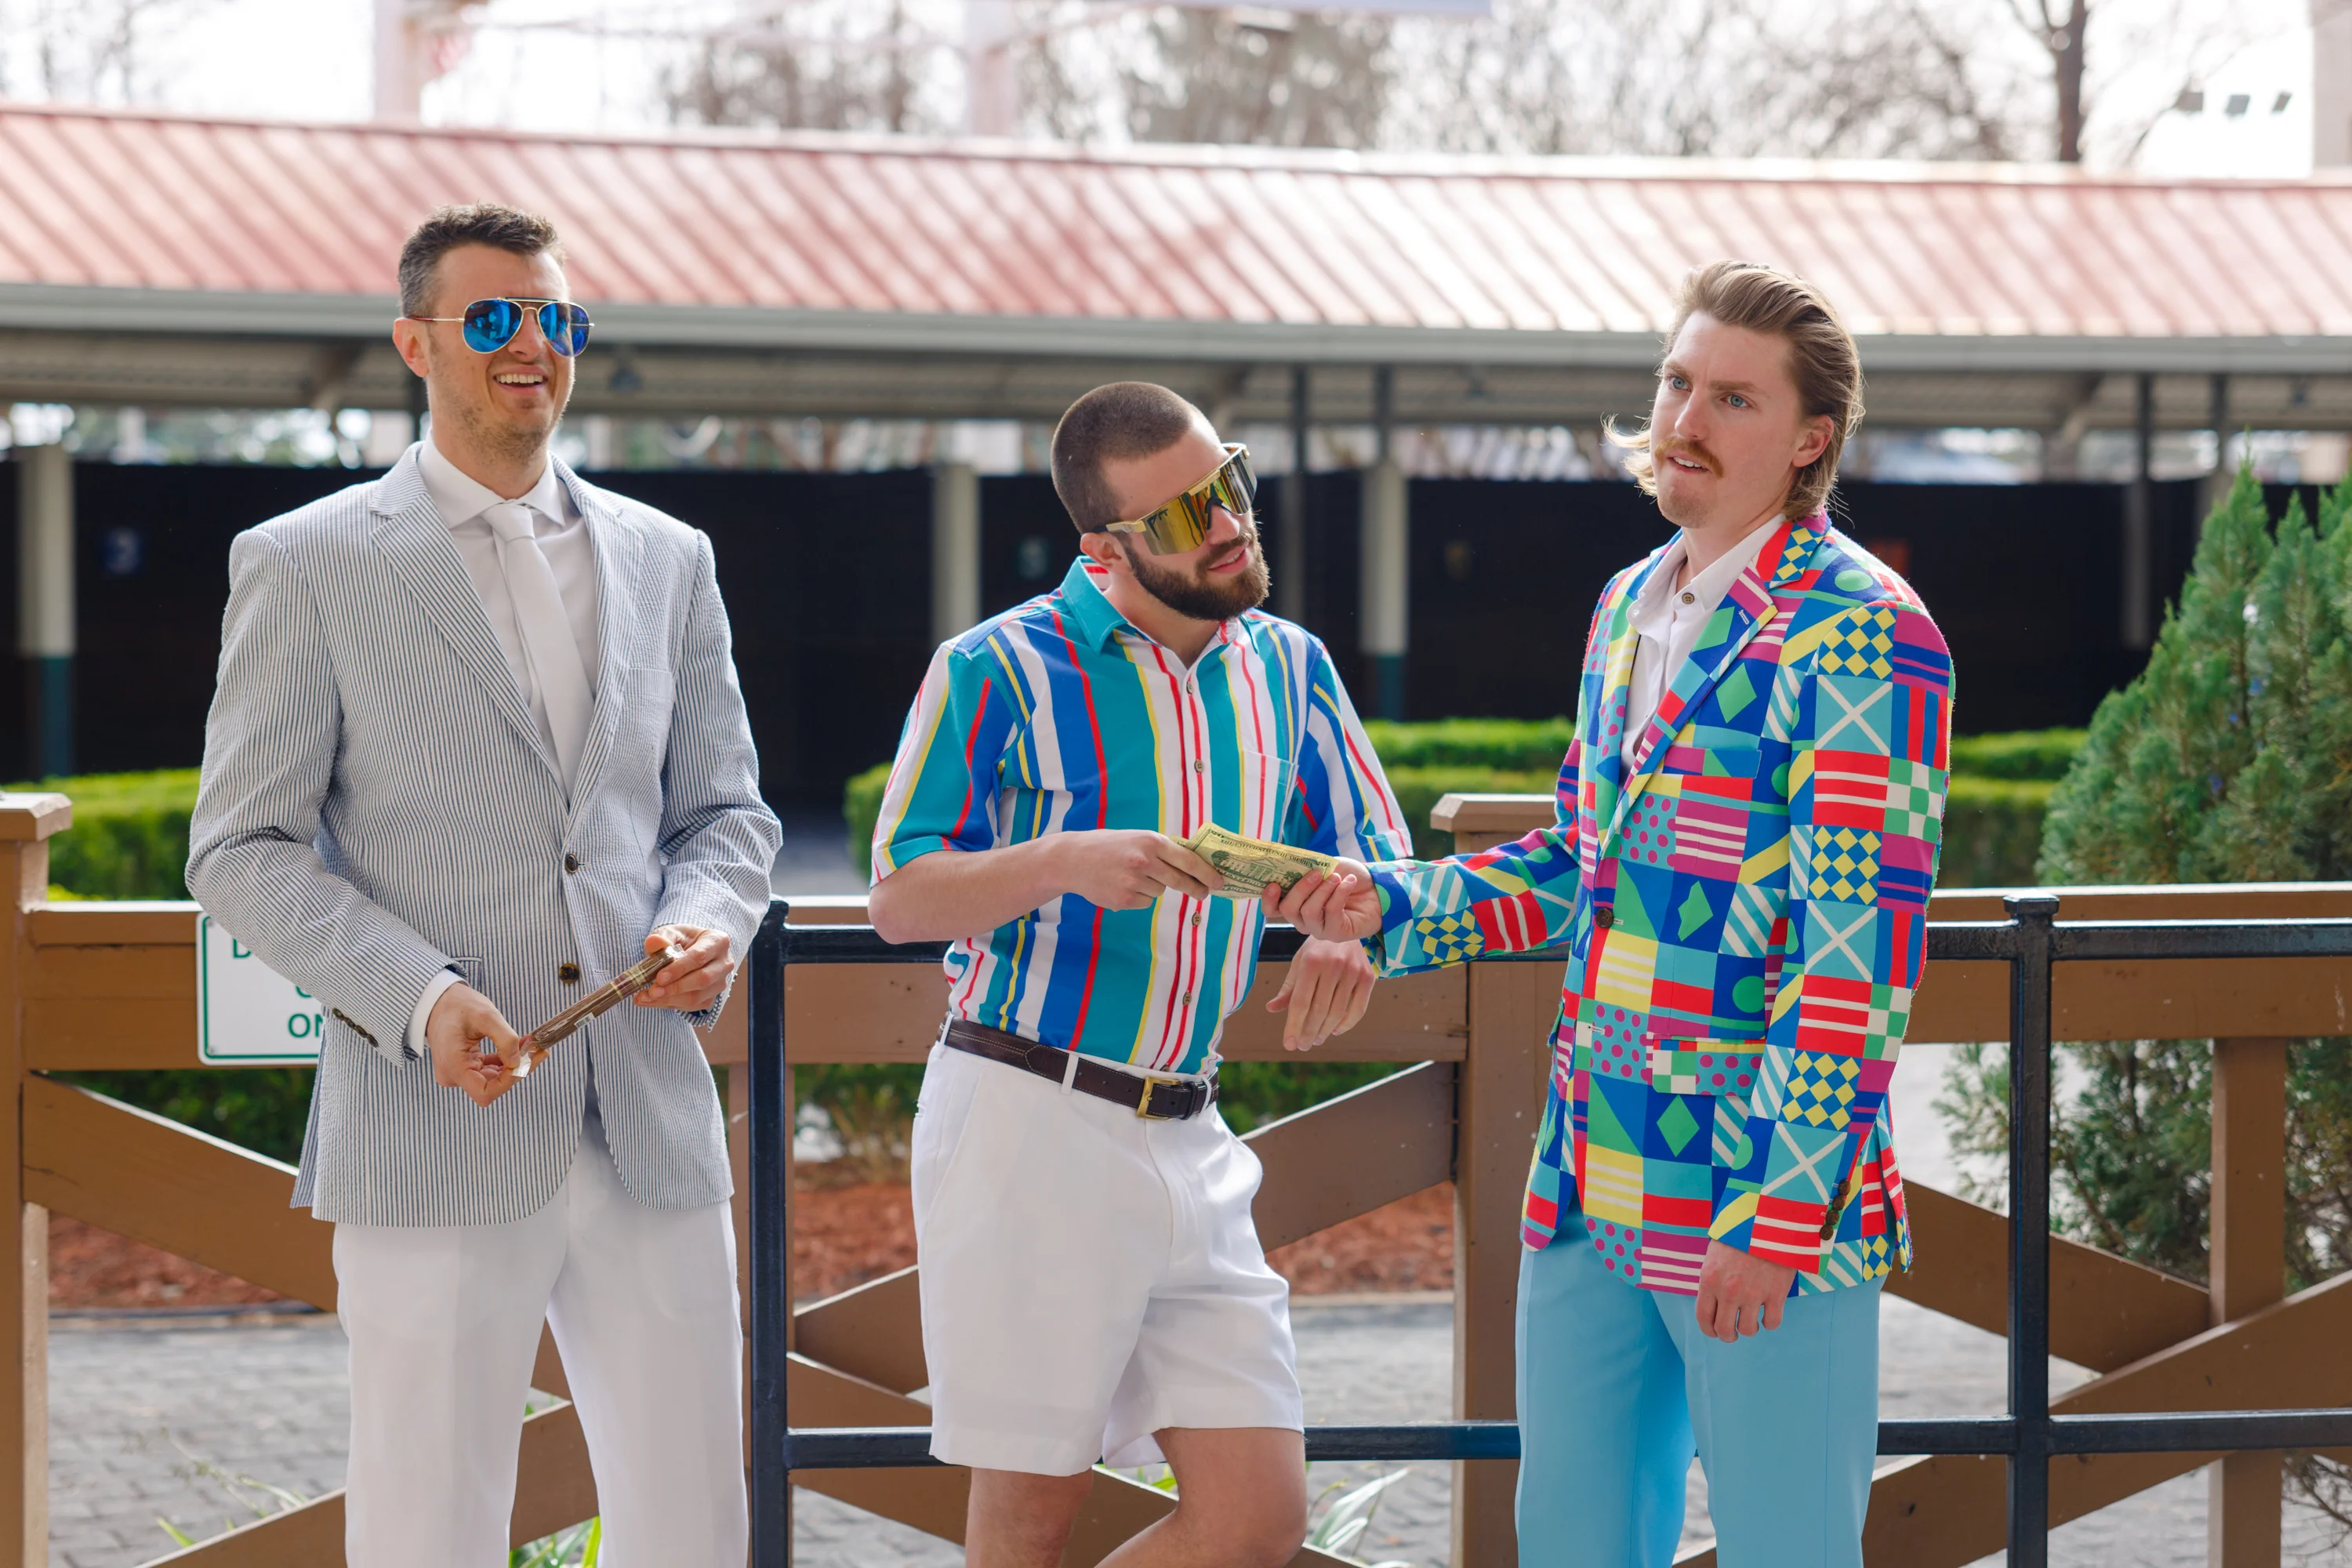 How to Choose the Right Kentucky Derby Outfit for Men?